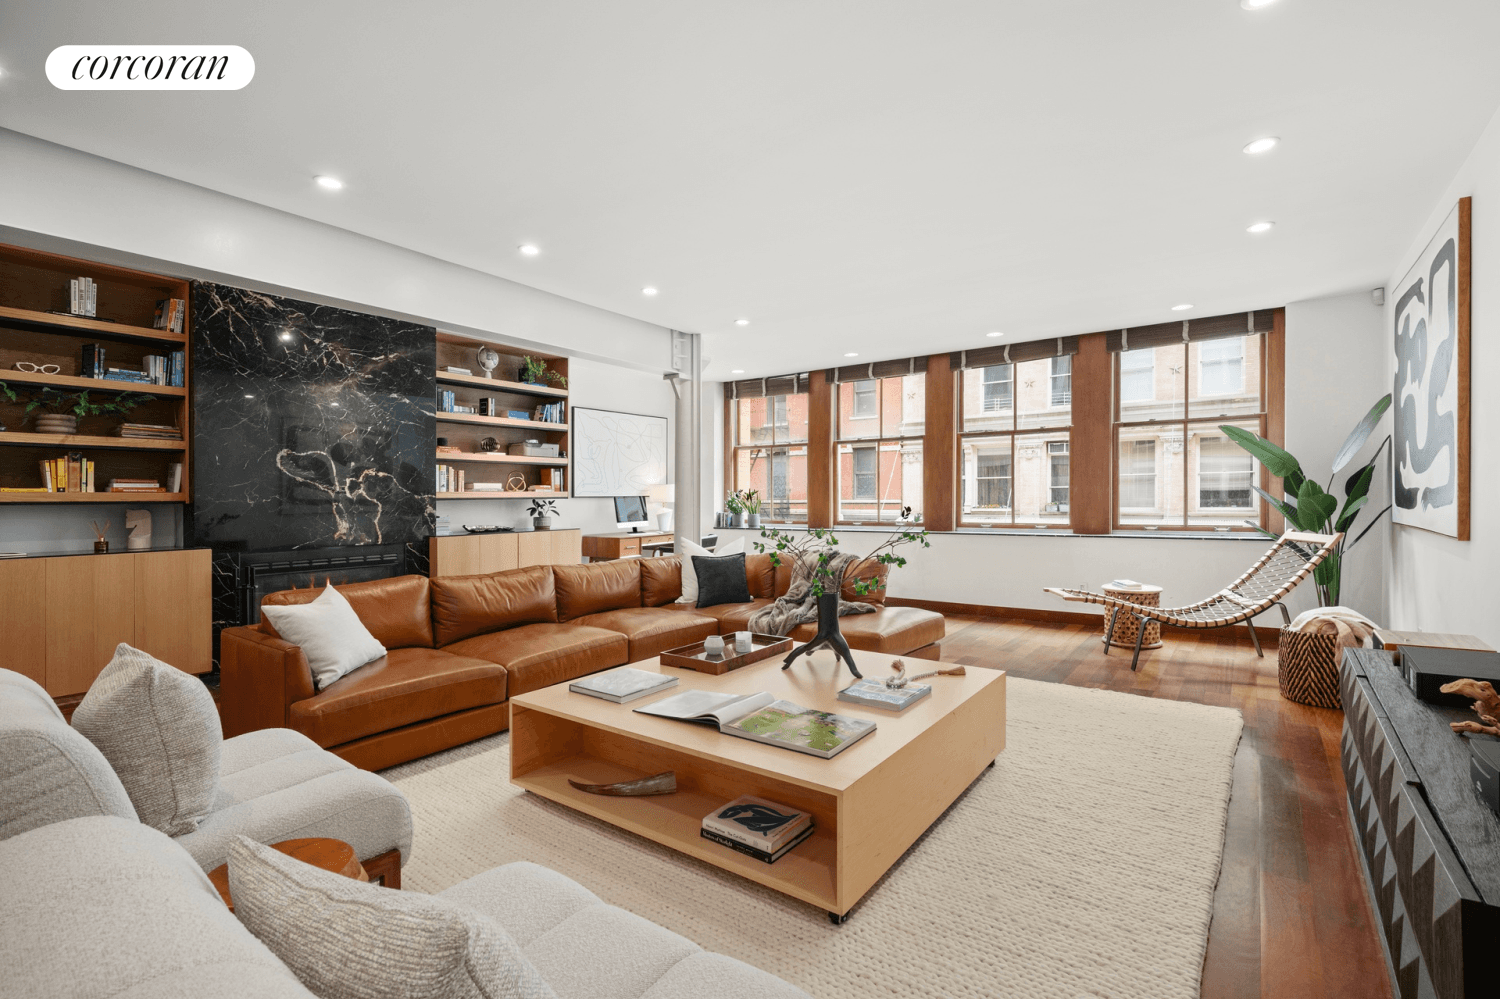 Contemporary designer style accentuates classic loft proportions in this sprawling two bedroom, two bathroom residence on one of Tribeca's premier blocks.